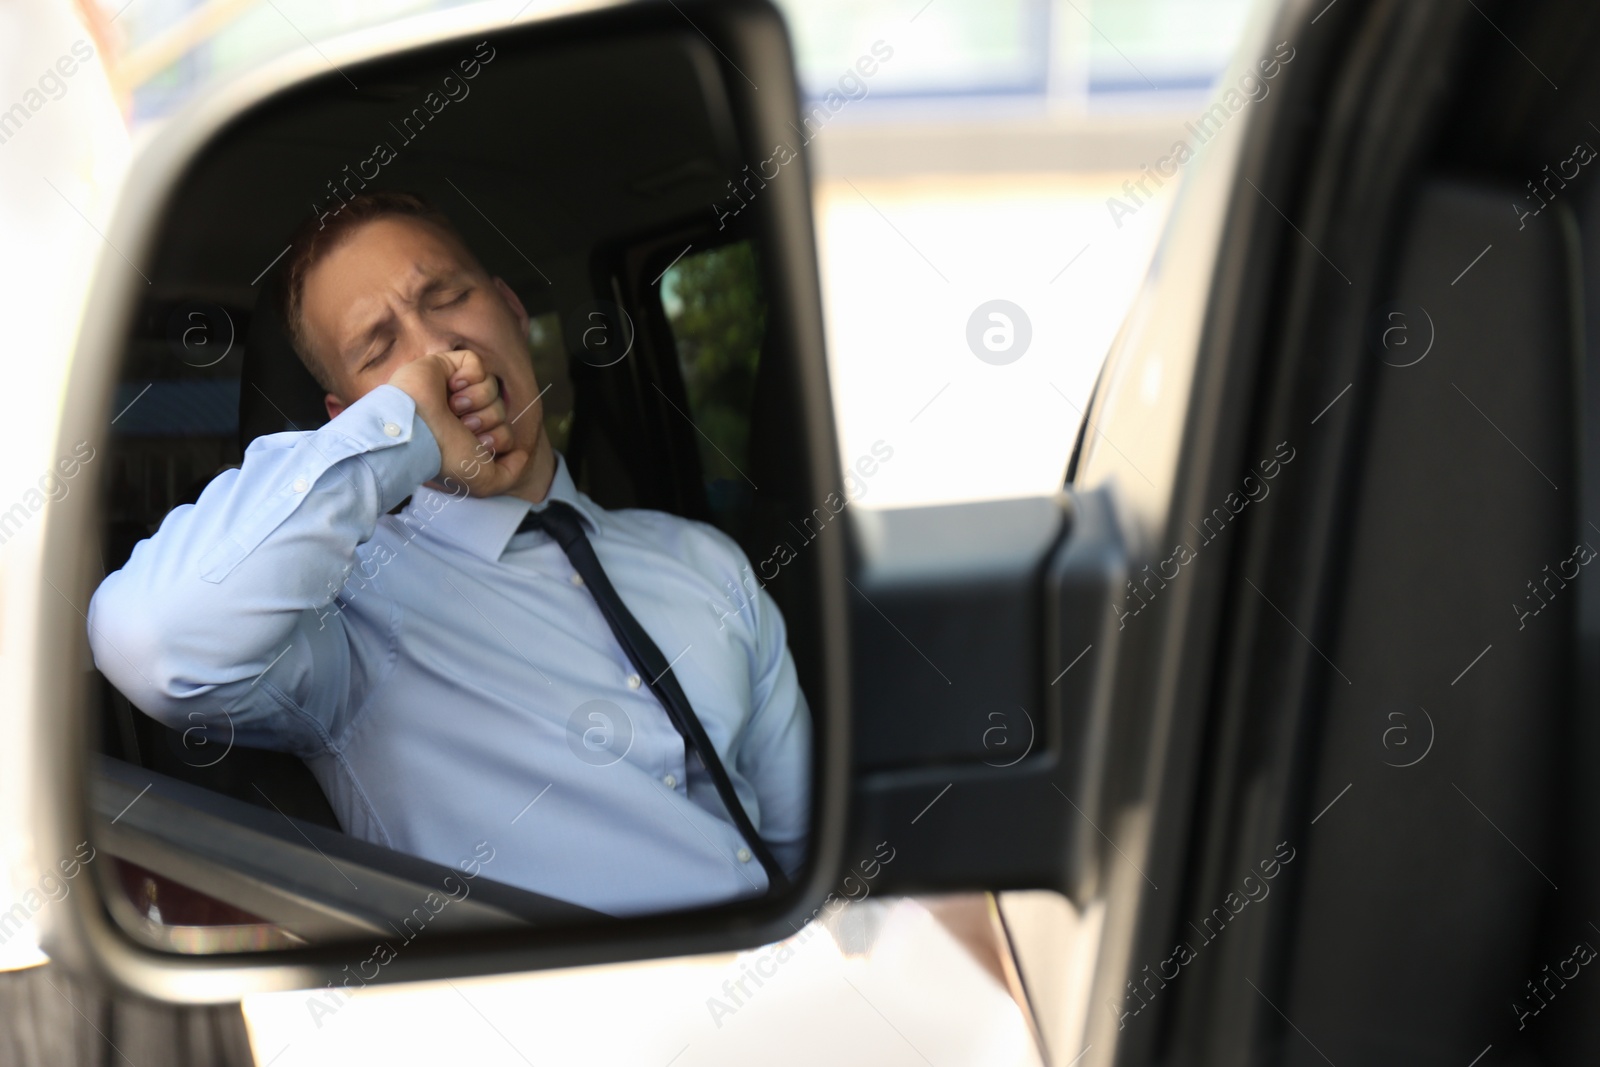 Photo of Tired young man yawning in his auto, view through car side mirror